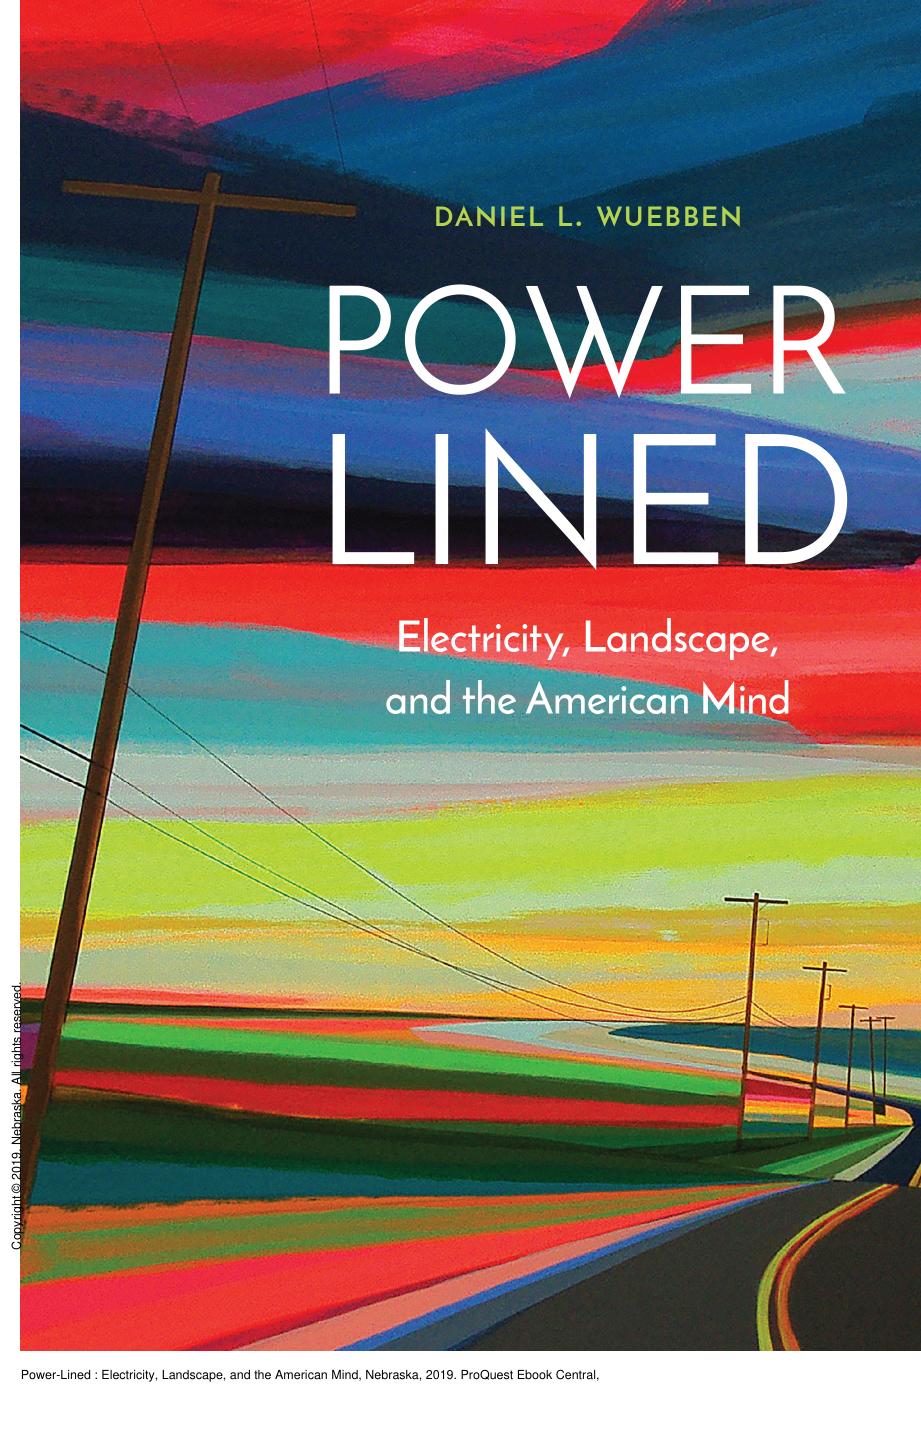 Power-Lined : Electricity, Landscape, and the American Mind by Daniel L. Wuebben